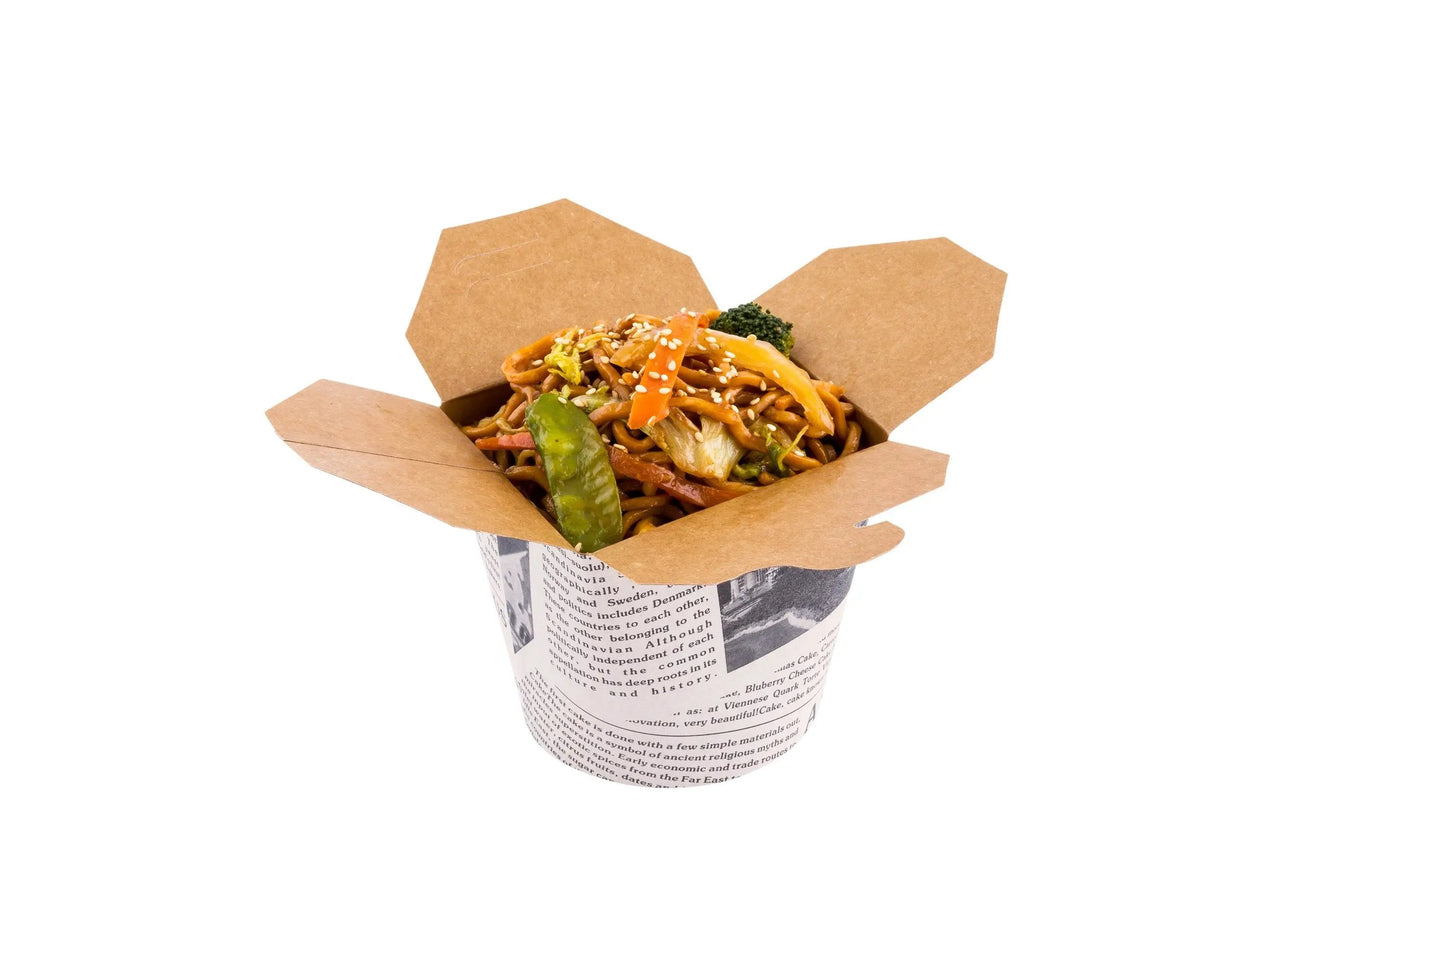 Bio Tek 26 oz Round Newsprint Paper Noodle Take Out Container - 4" x 3 1/2" x 3 3/4" - 200 count box